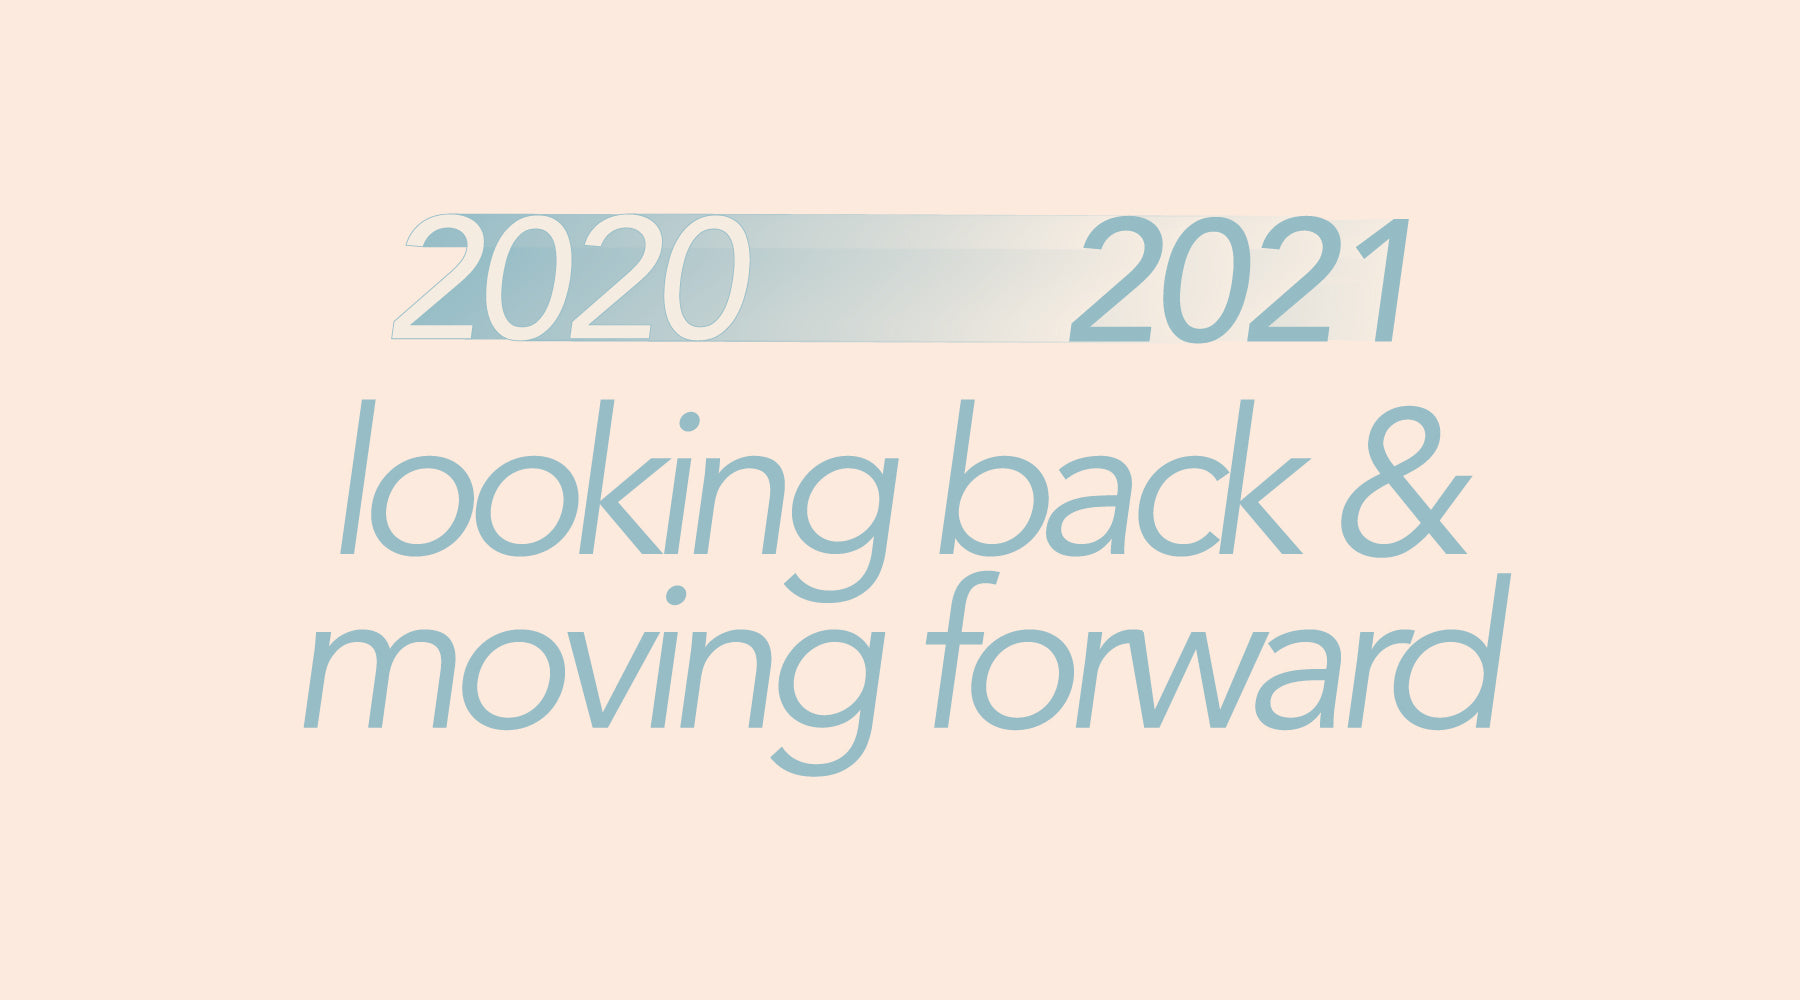 We’re Looking Forward to 2021, But Not For The Reasons You Might Think